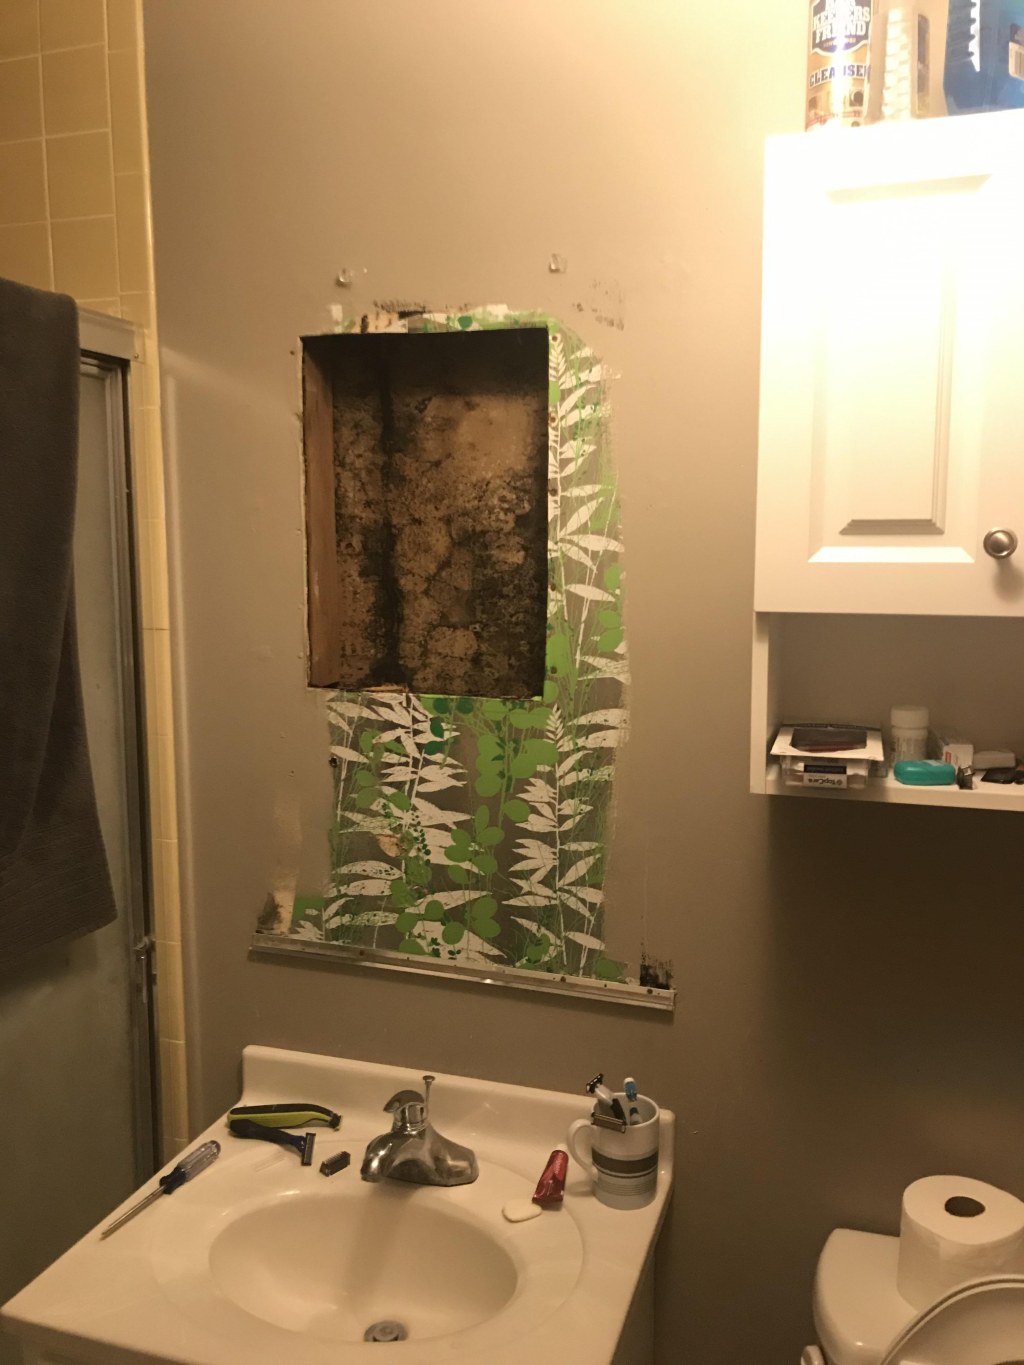 Picture of: Removed mirror in bathroom found lots of mold in the wall